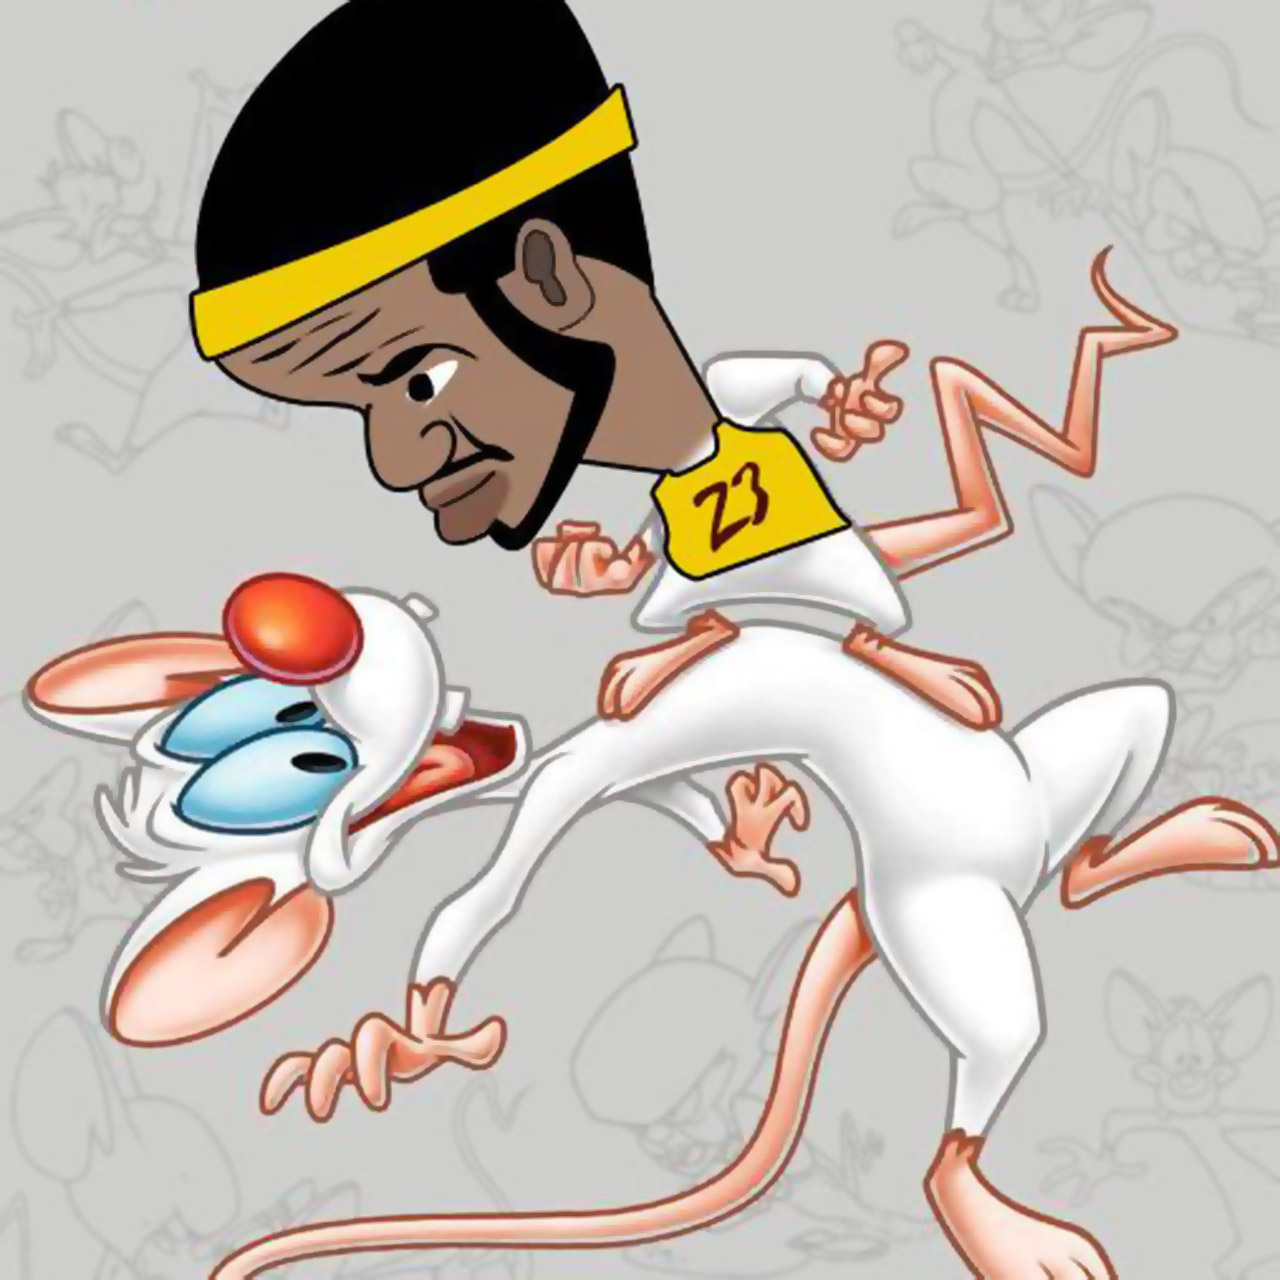 "Pinky and the Brain" becomes "Pinky and the 'Bron"